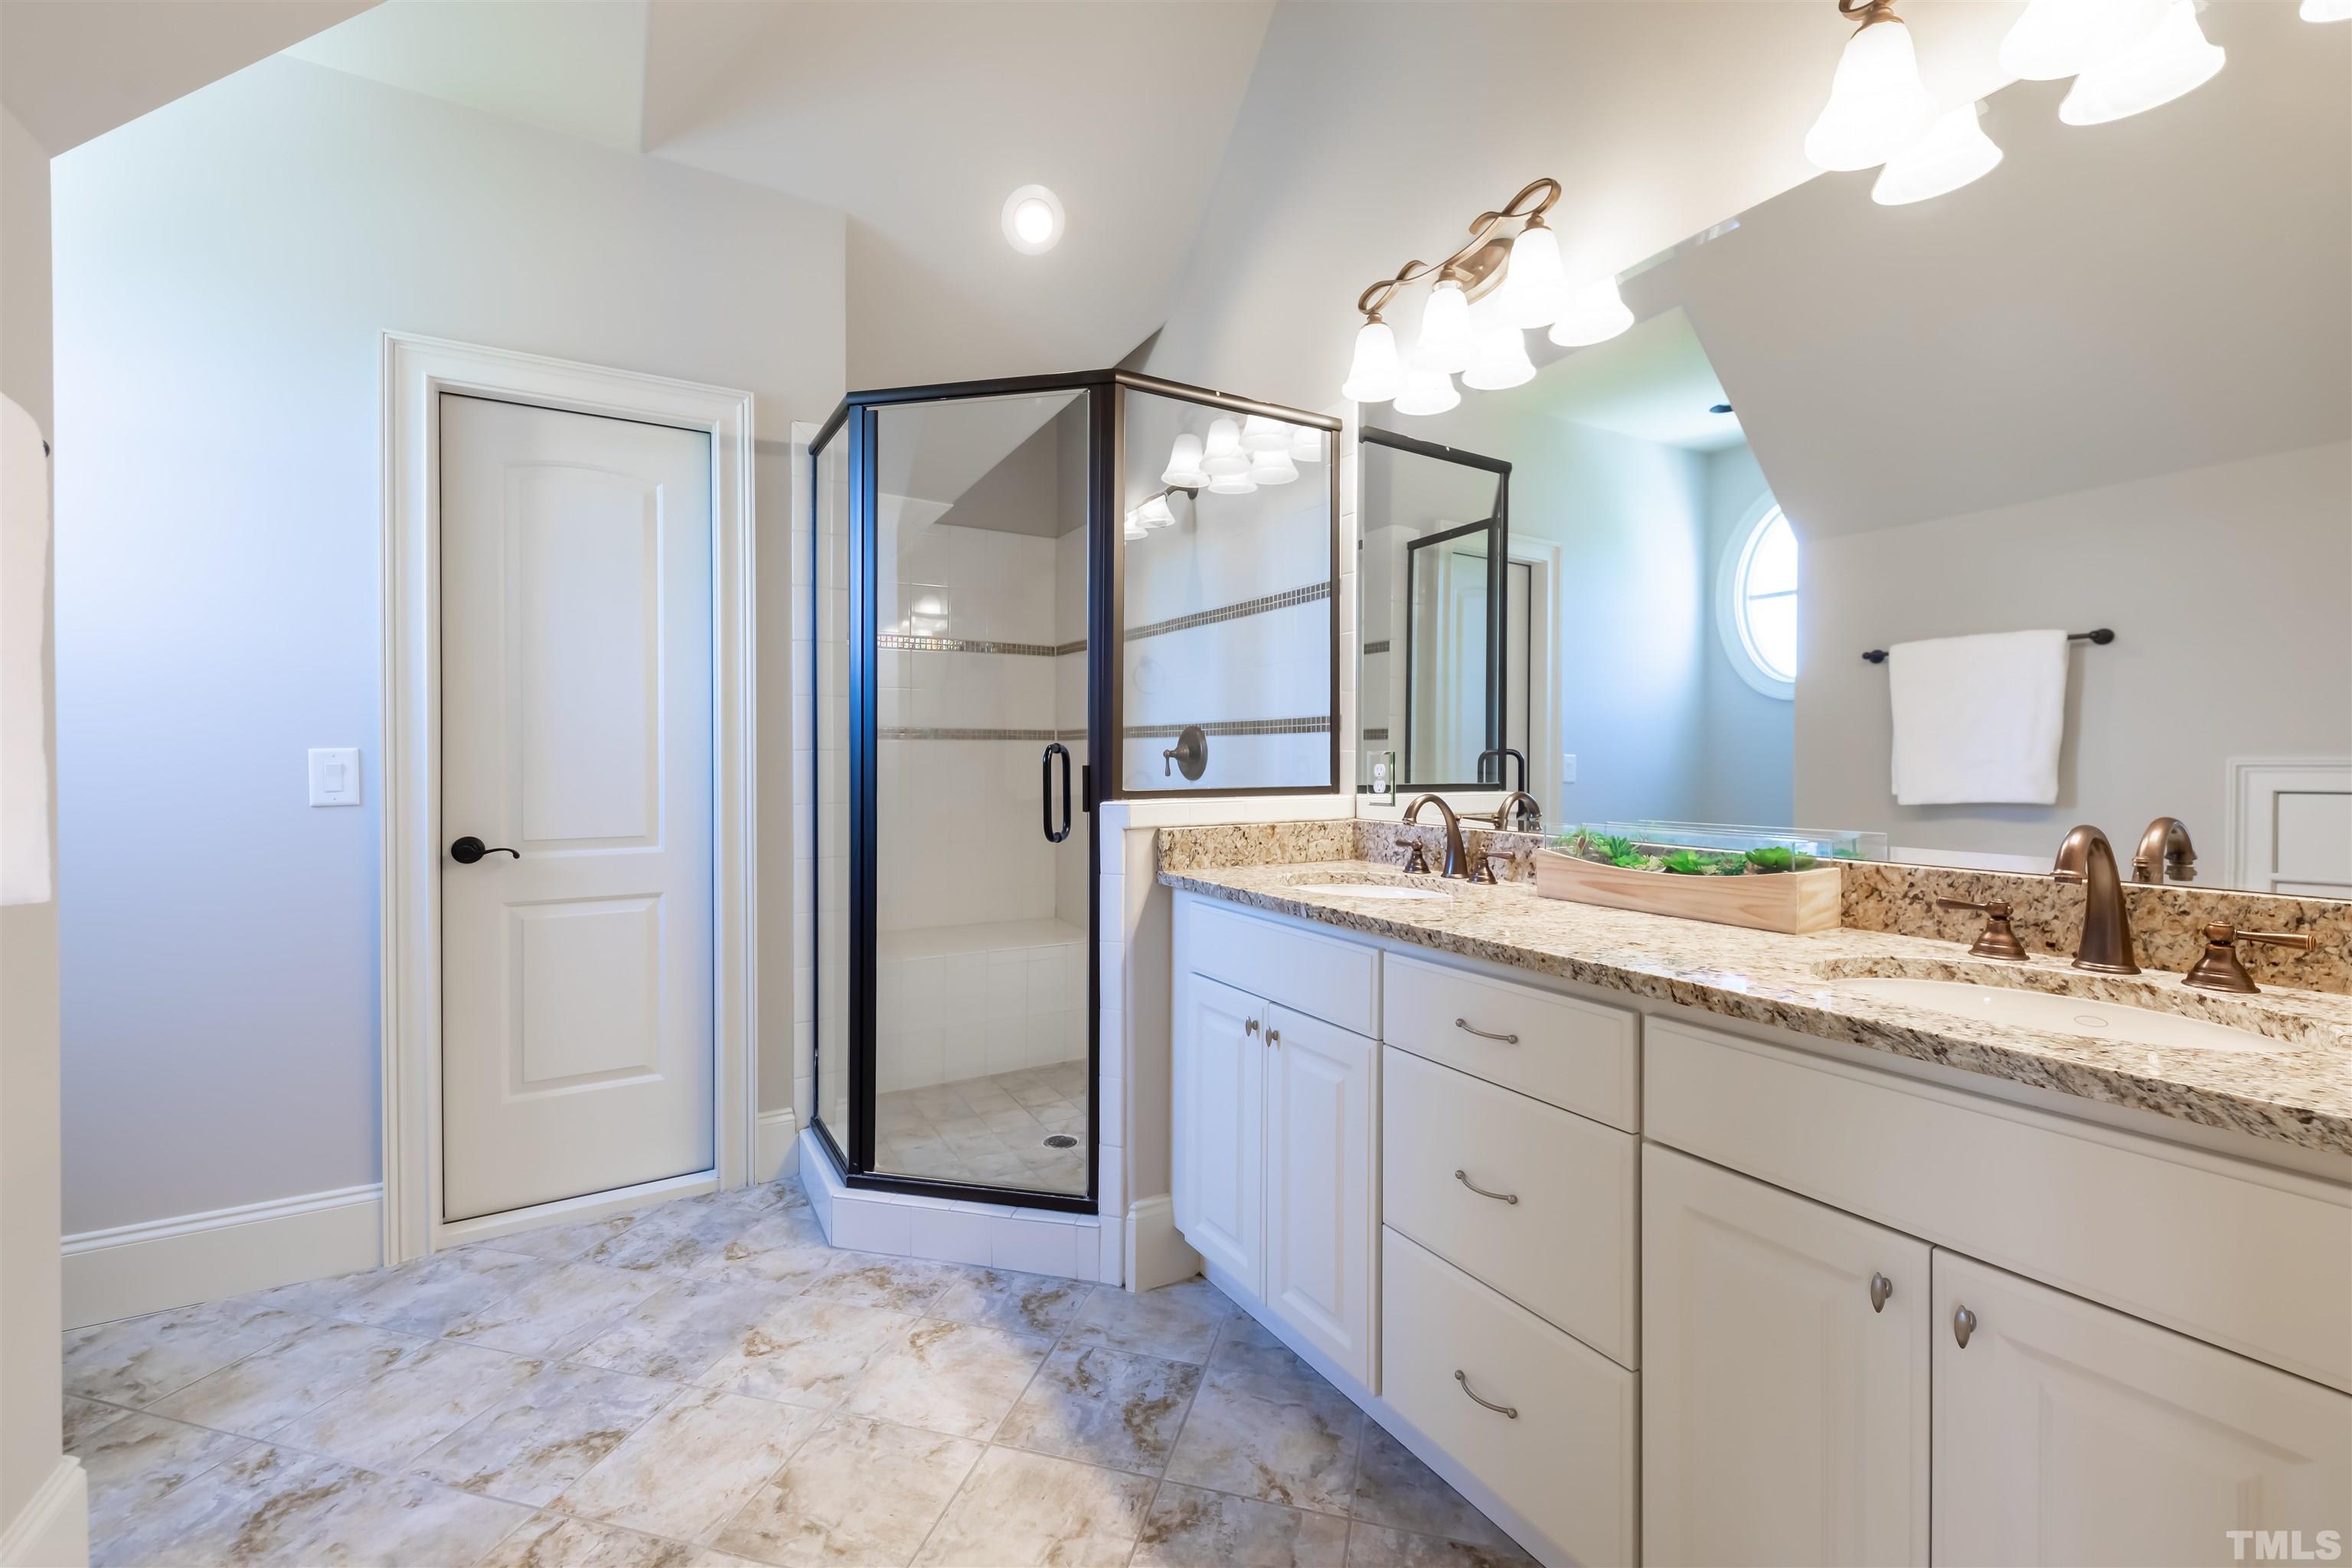 The bathroom to the front bedroom has a walk in shower.  The bathroom to the back bedroom has a tub/shower combo and can be accessed from the bedroom or the hall.